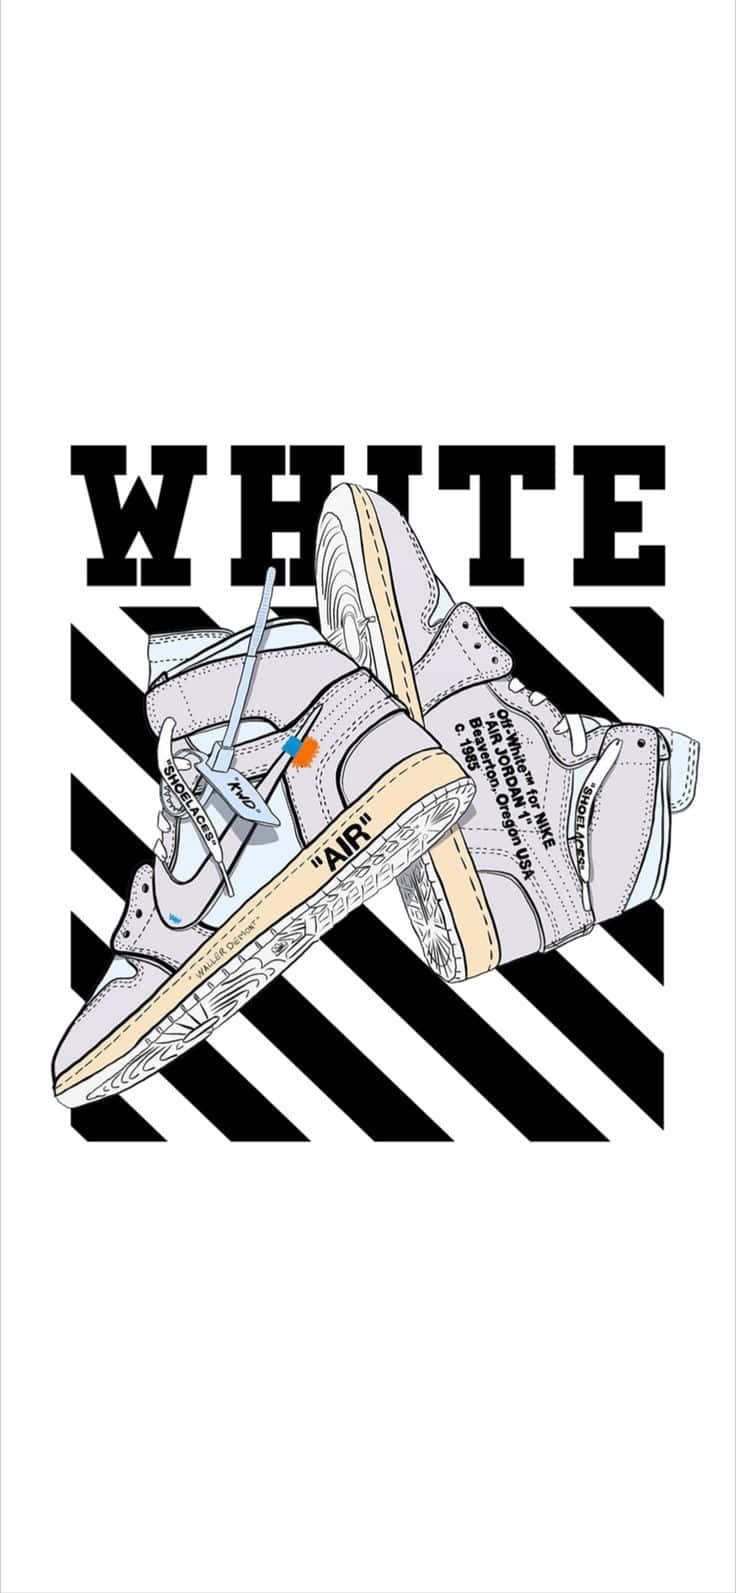 White hot electric style! Breaking boundaries with the Off White Jordan 1 sneaker. Wallpaper